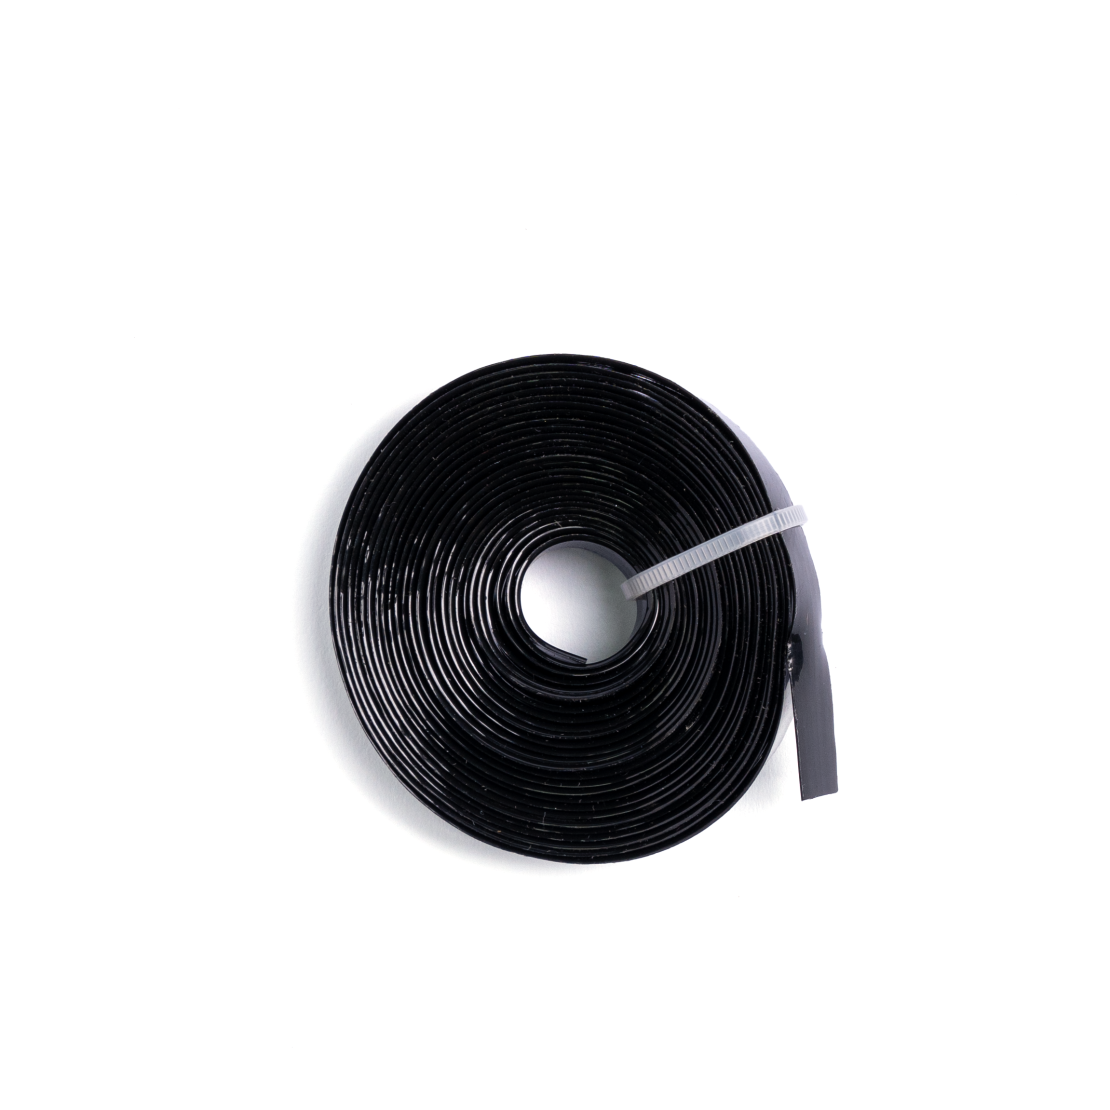 Adhesive roll for hair lifting